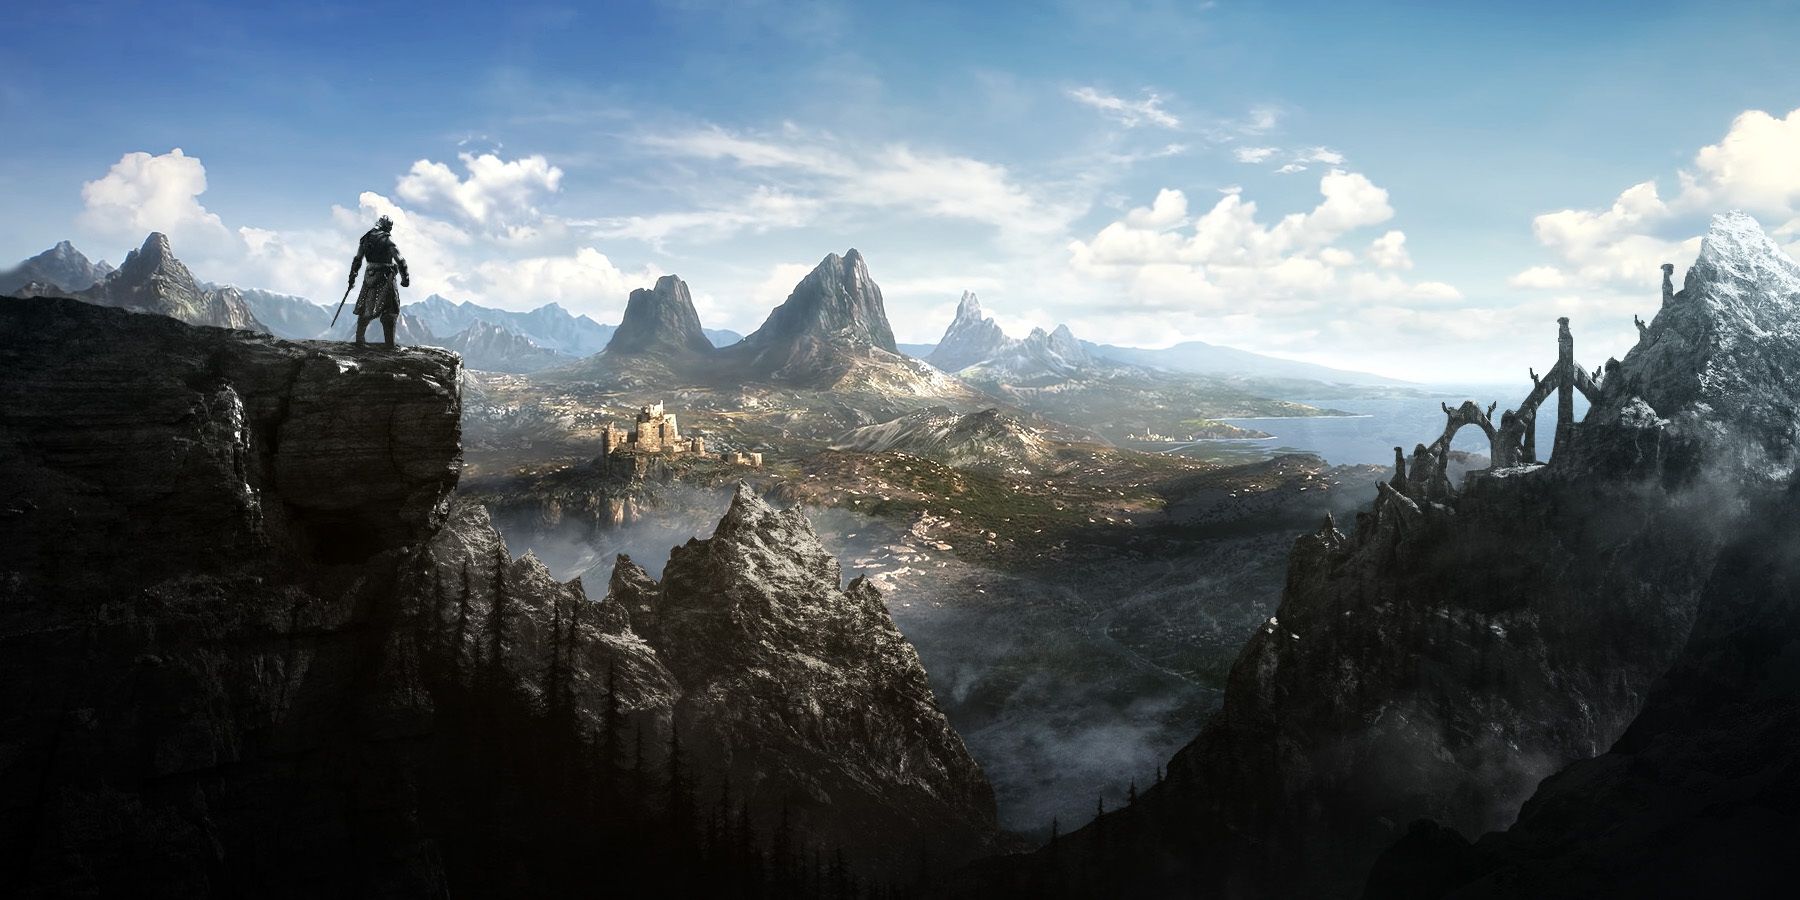 Bethesda Shares Exciting Update for The Elder Scrolls 6